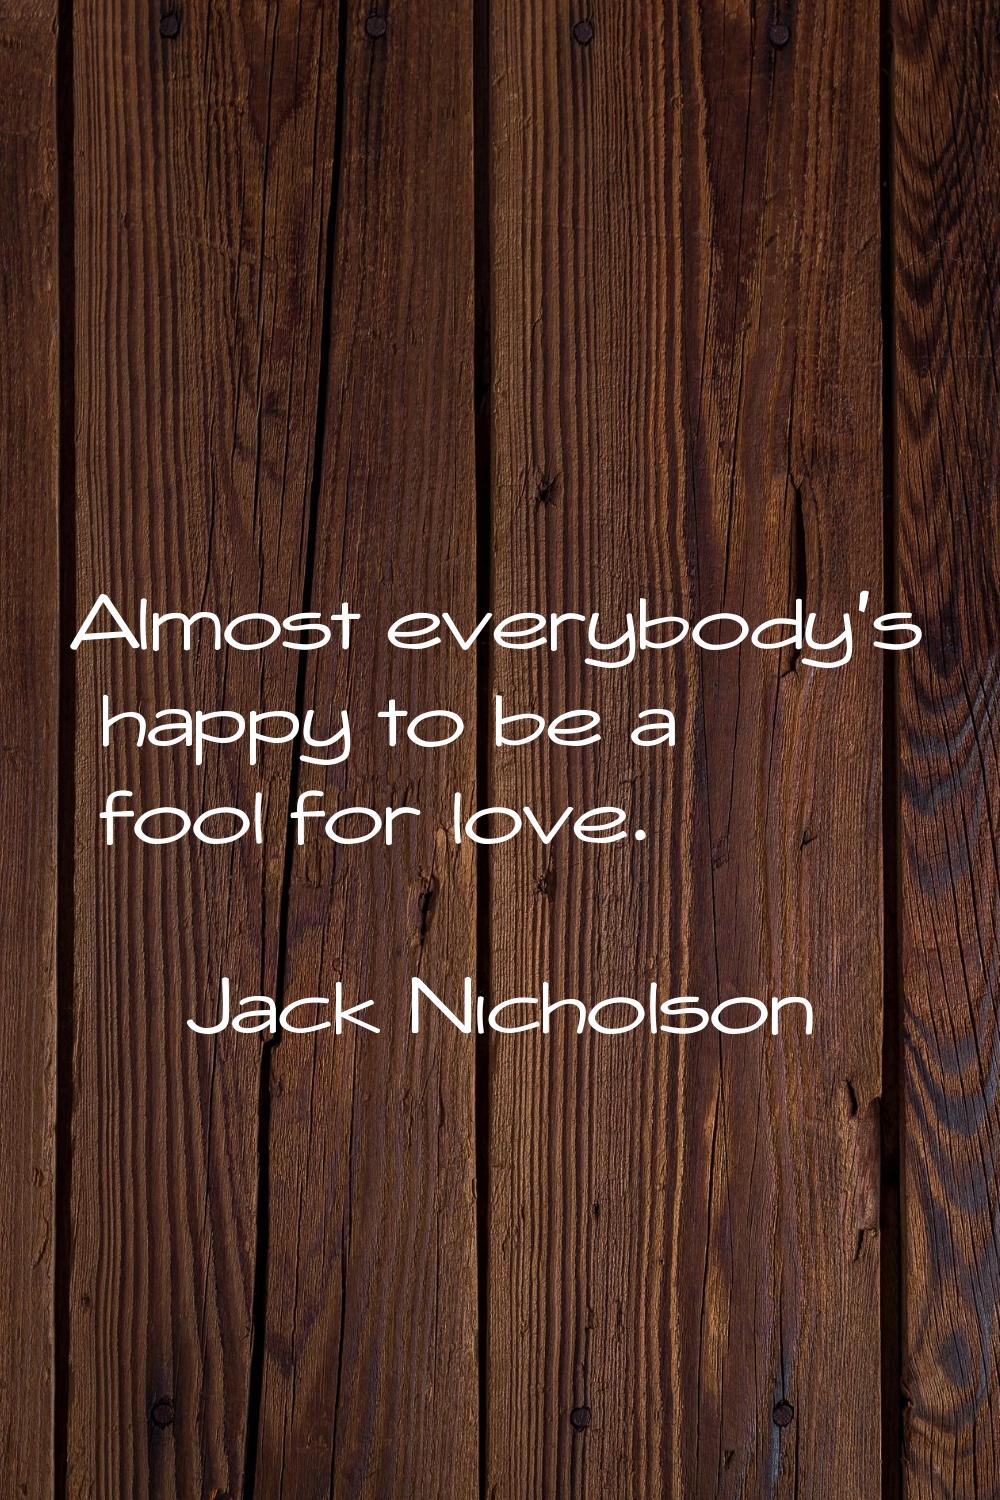 Almost everybody's happy to be a fool for love.